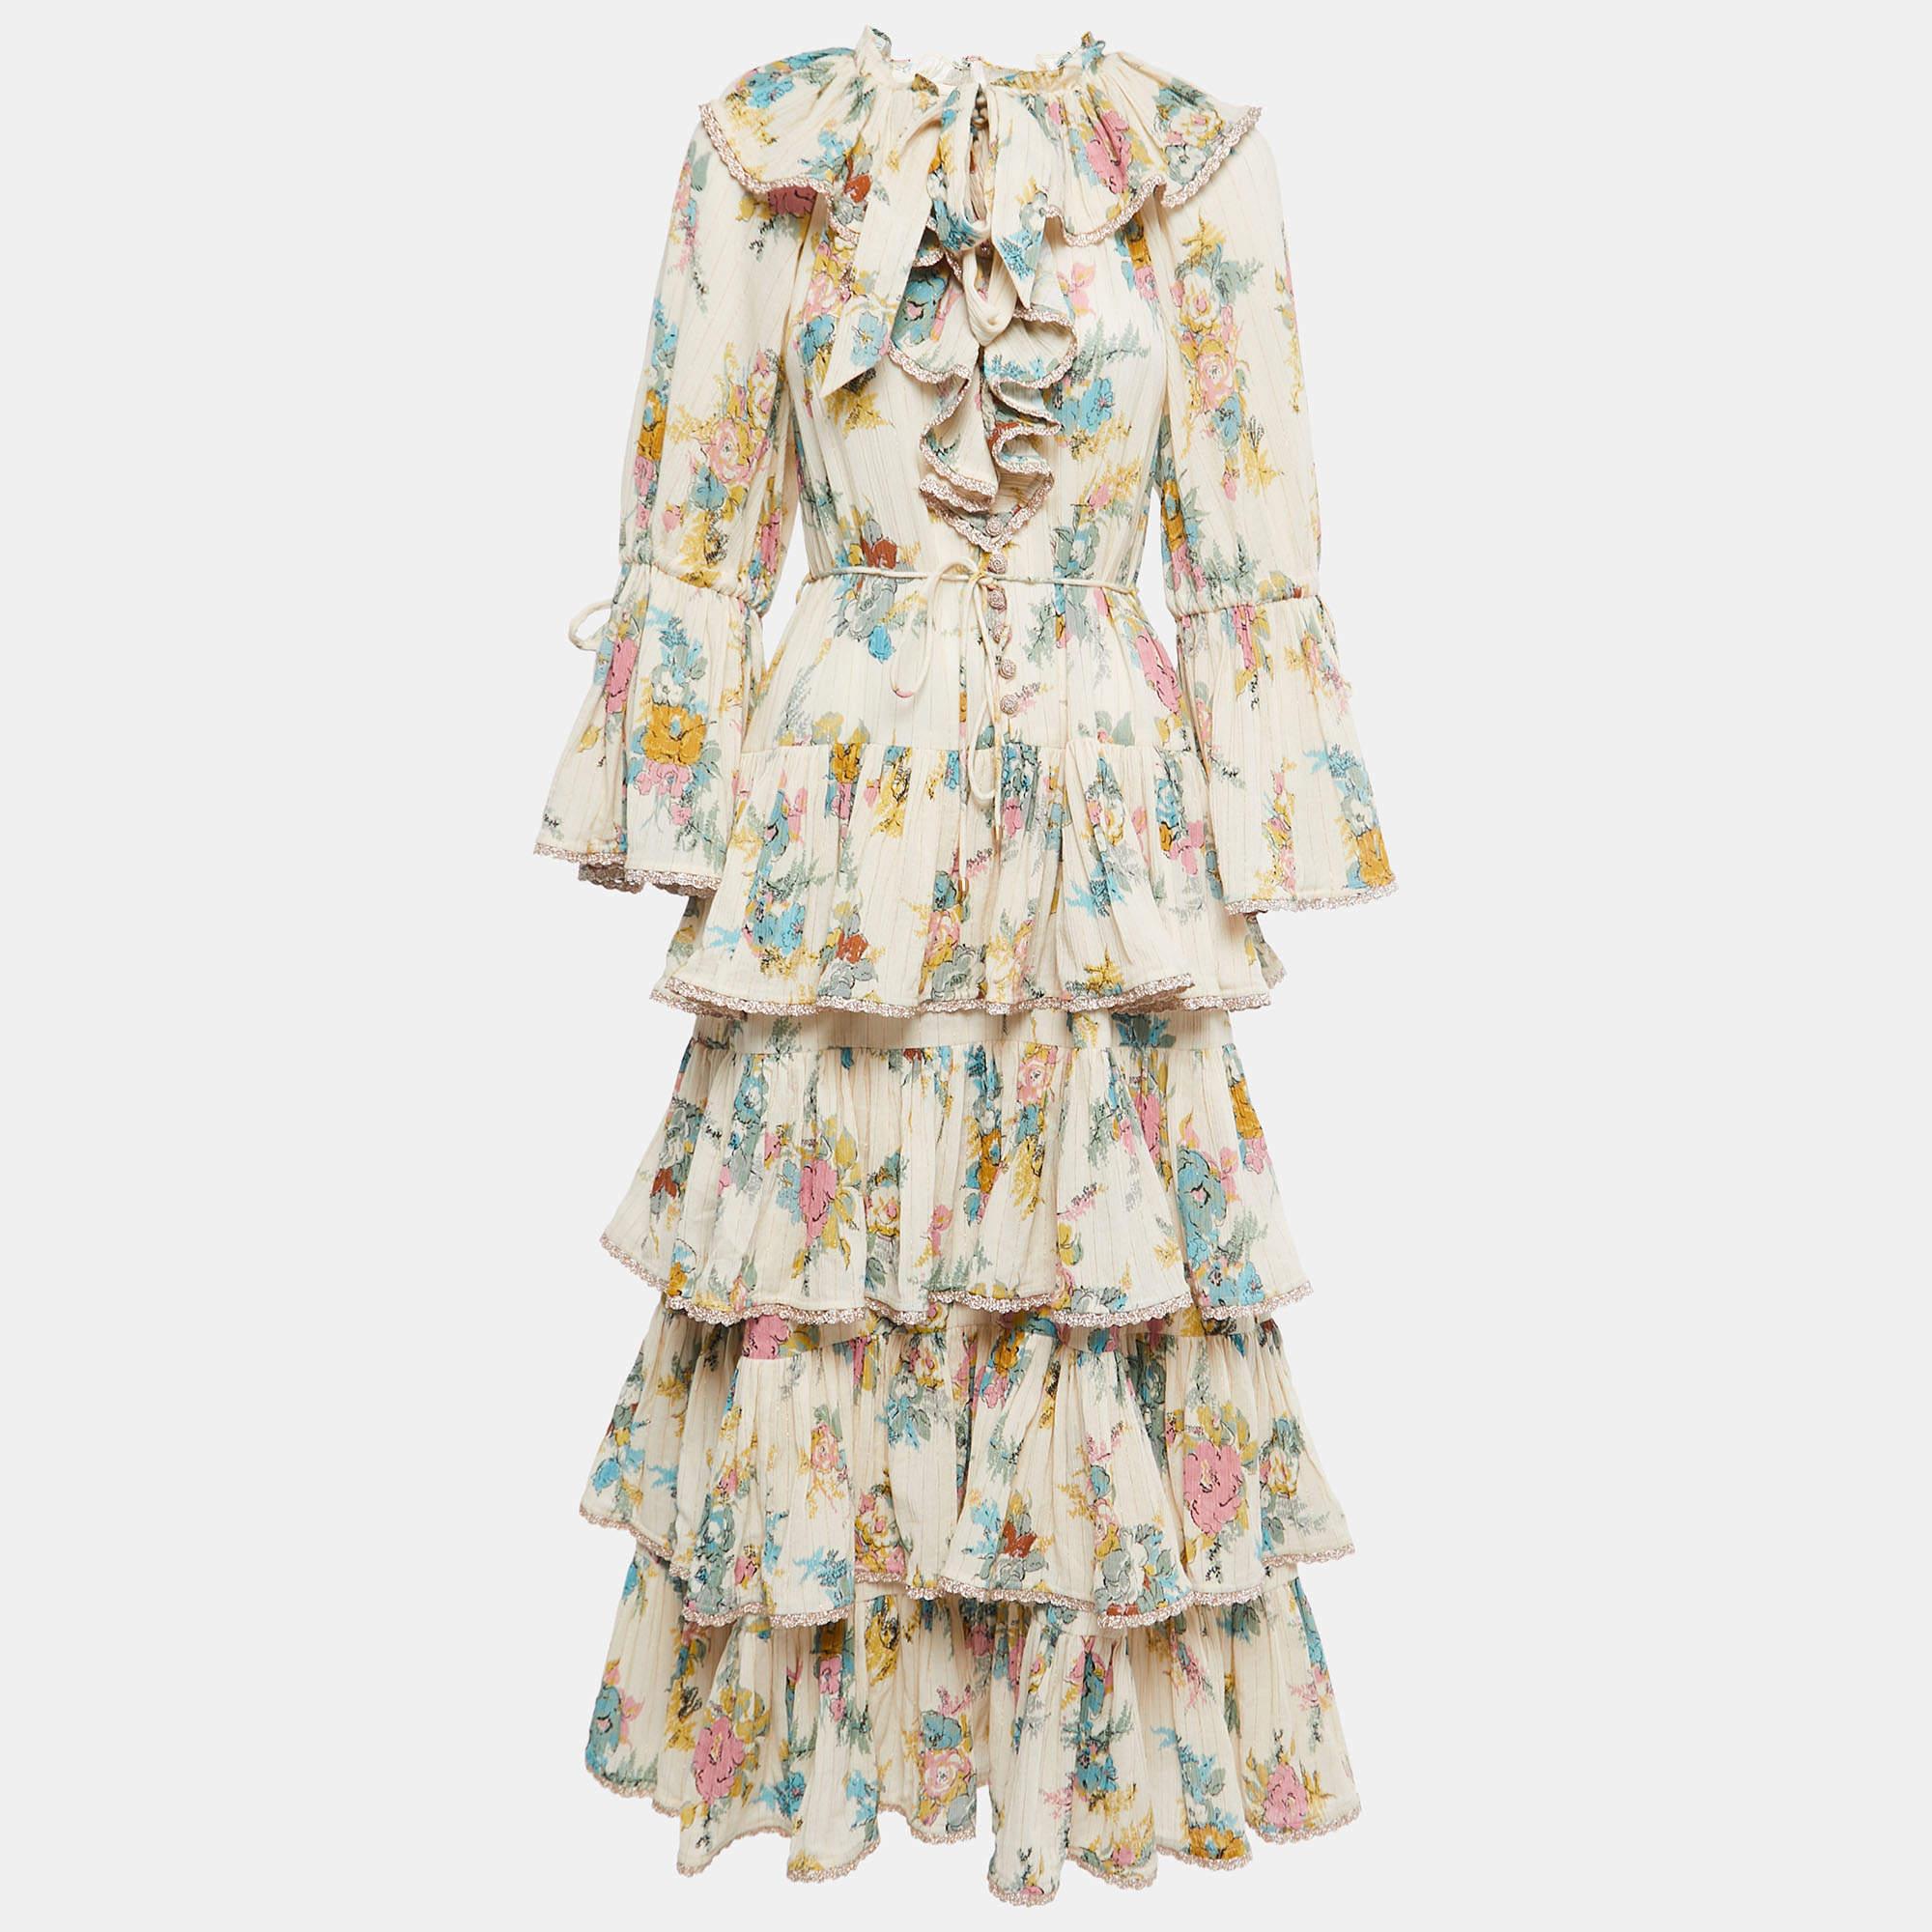 The Zimmermann dress is a charming and elegant piece featuring a cream-colored cotton fabric adorned with intricate floral patterns. Its tiered design adds a playful touch, making it a perfect choice for a stylish summer outfit.

